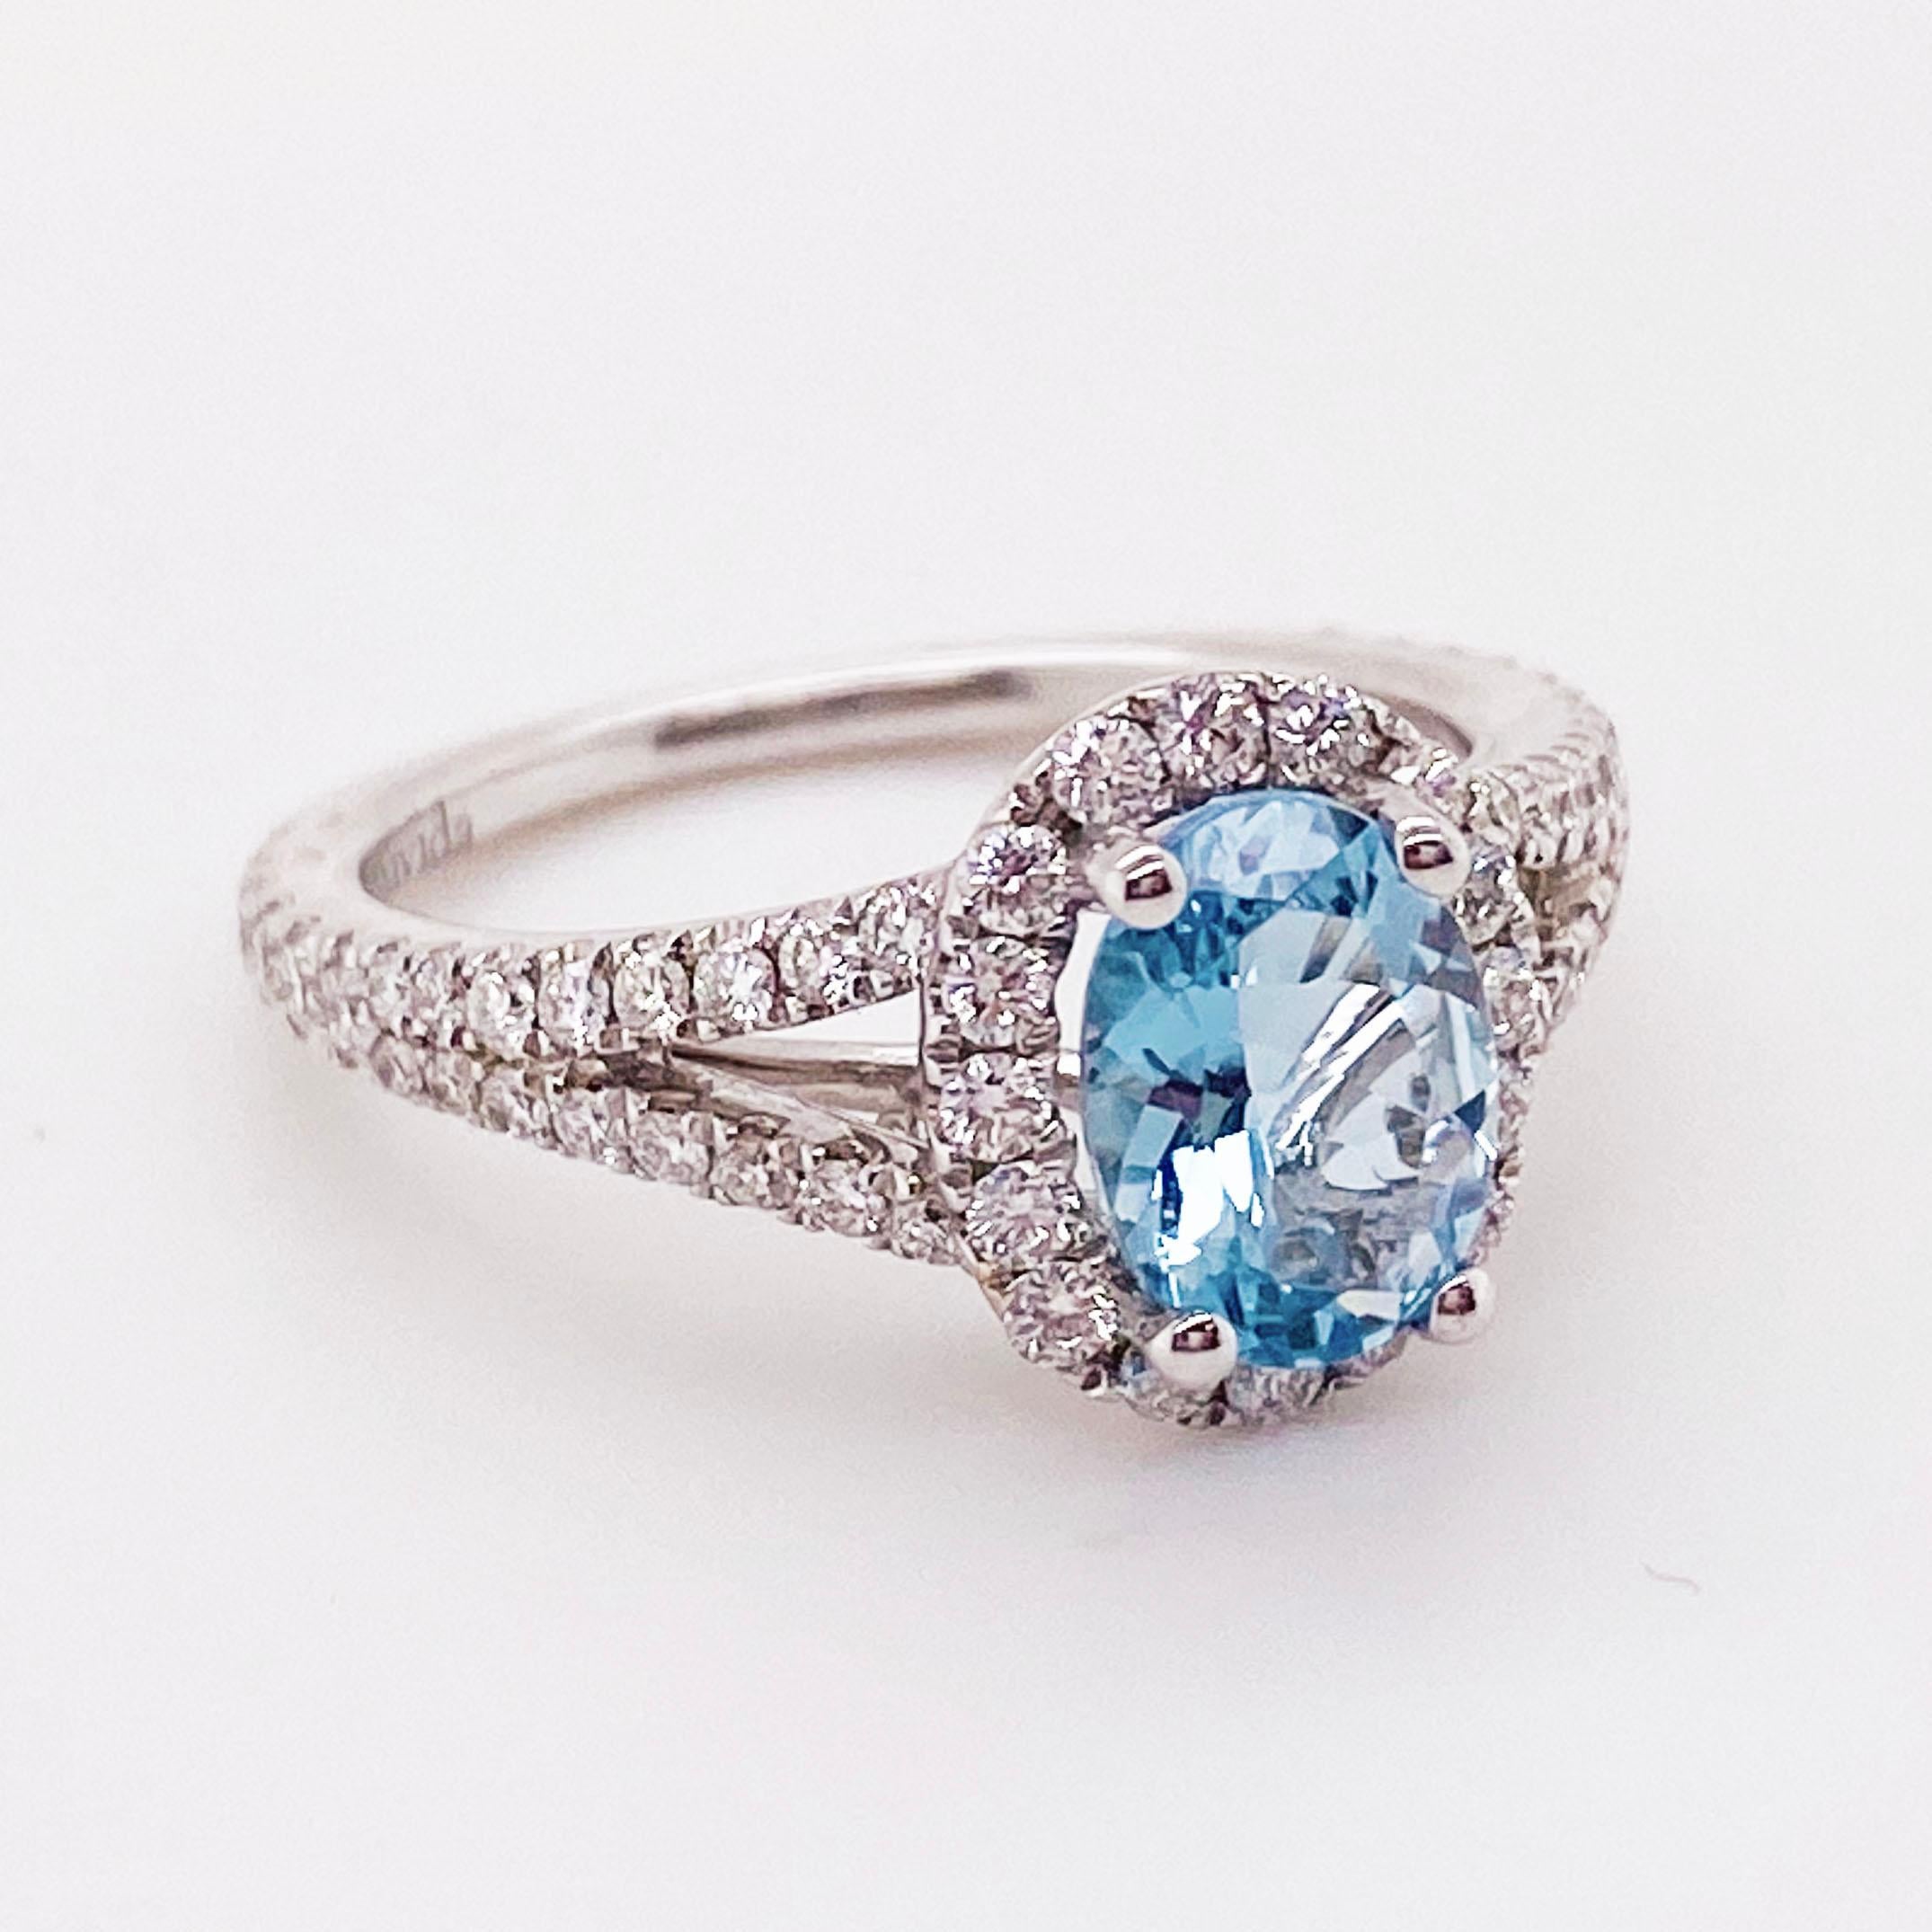 18 Karat White Gold
1.59 ct tw Diamonds and Aquamarine
Oval Aquamarine 
.95 carat Aquamarine 
.64 carats total diamond weight 
Ring Size- 6.75 (can be resized)
60 total diamonds 